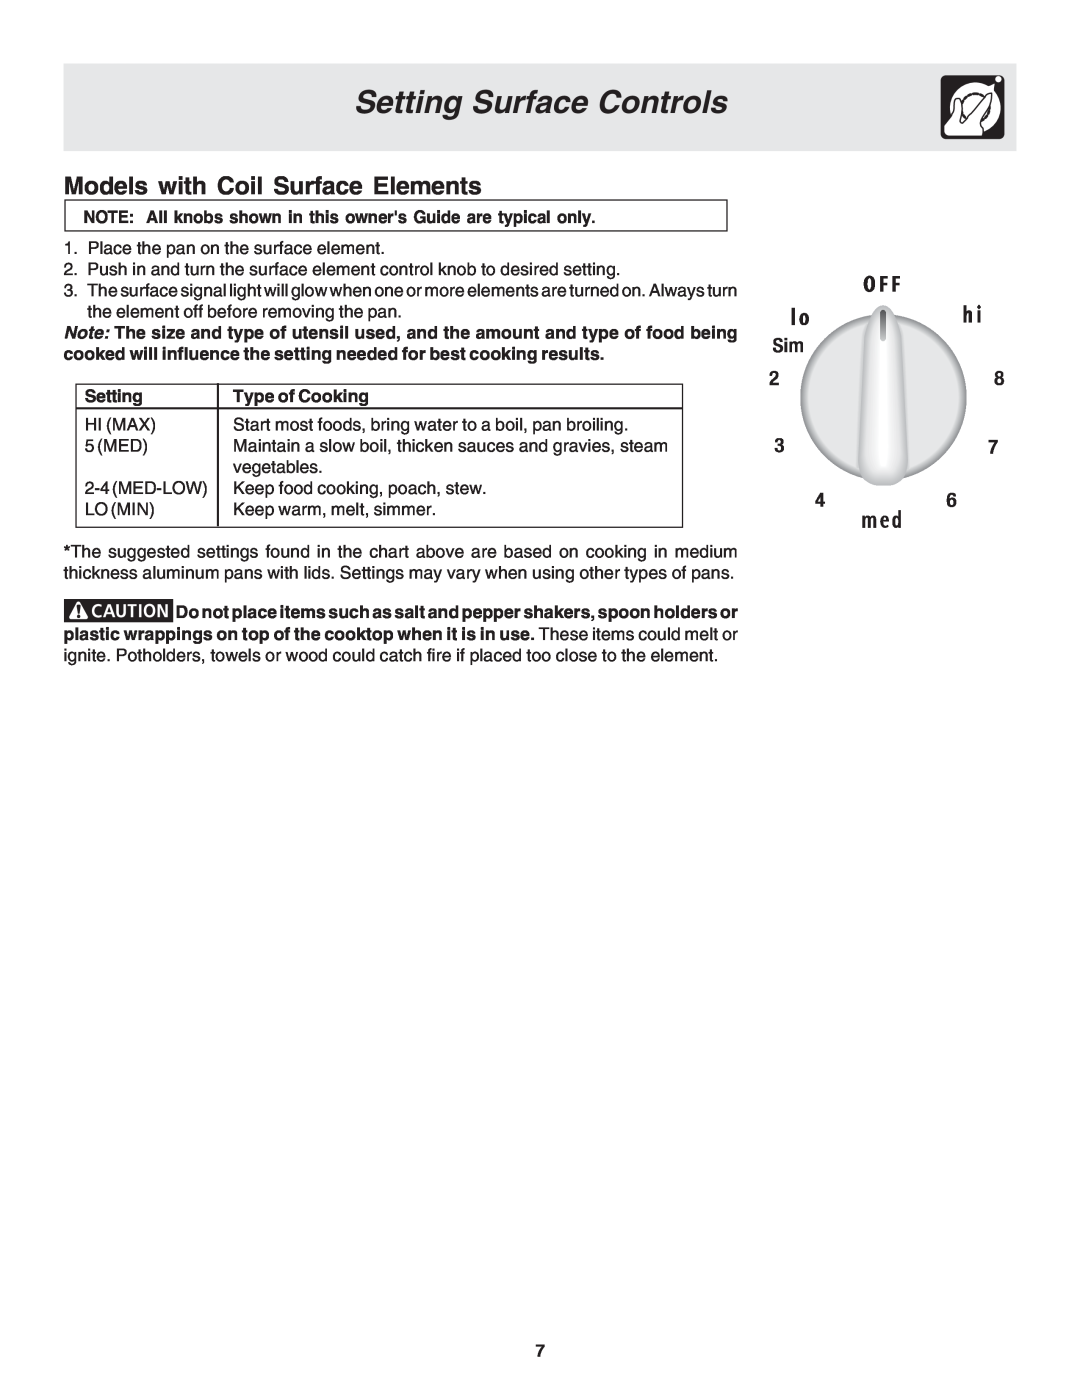 Frigidaire 318203825 warranty Setting Surface Controls, Models with Coil Surface Elements, Type of Cooking 